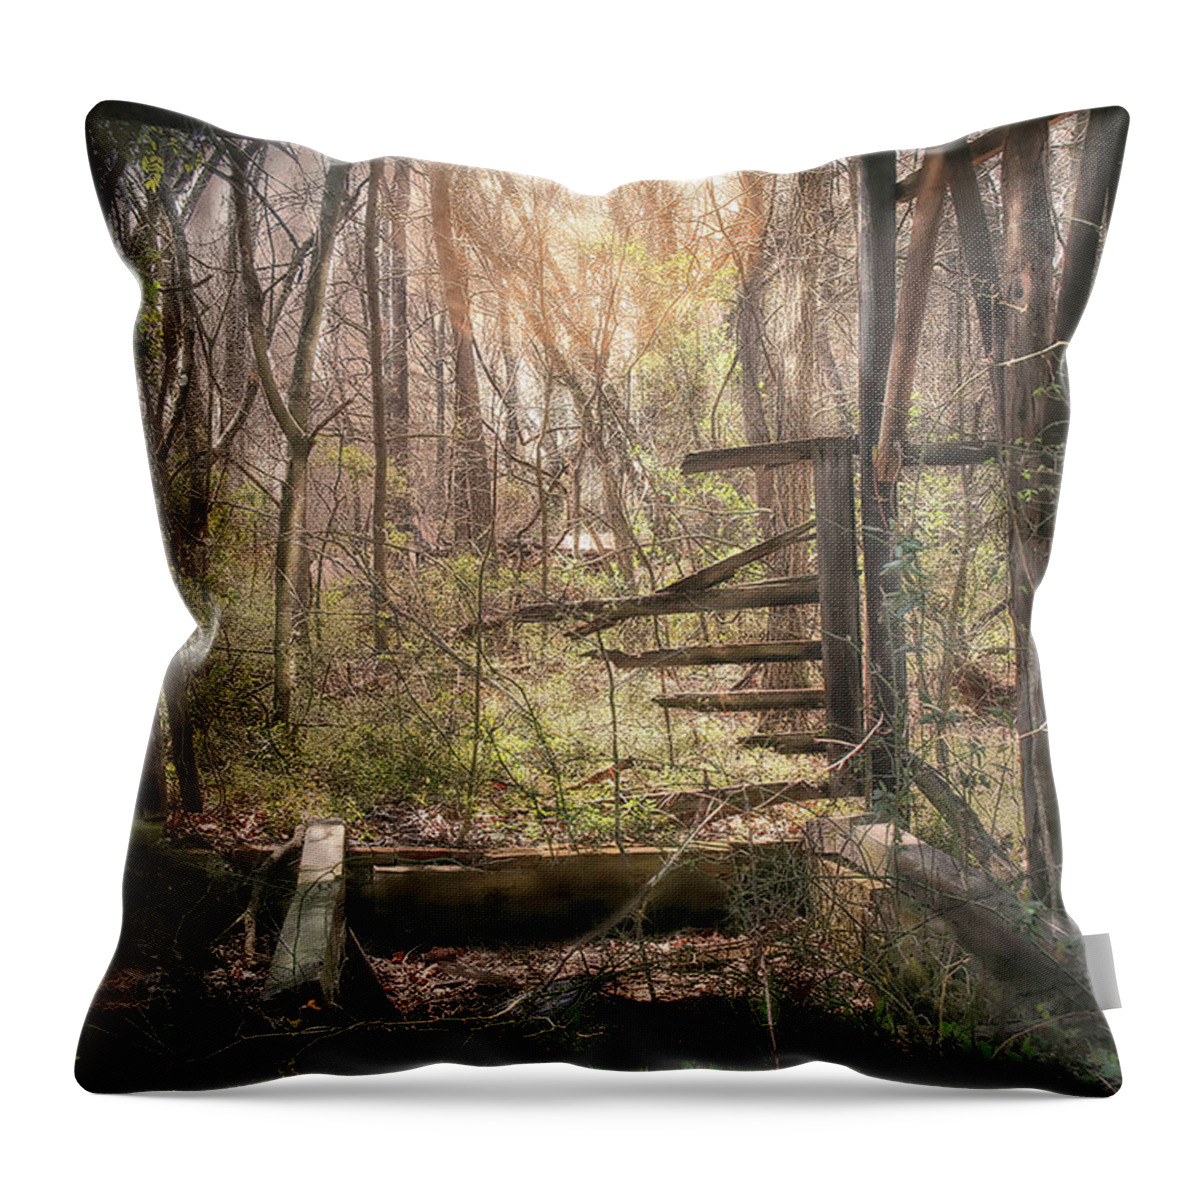 Building Throw Pillow featuring the photograph Been There by Bonnie Willis